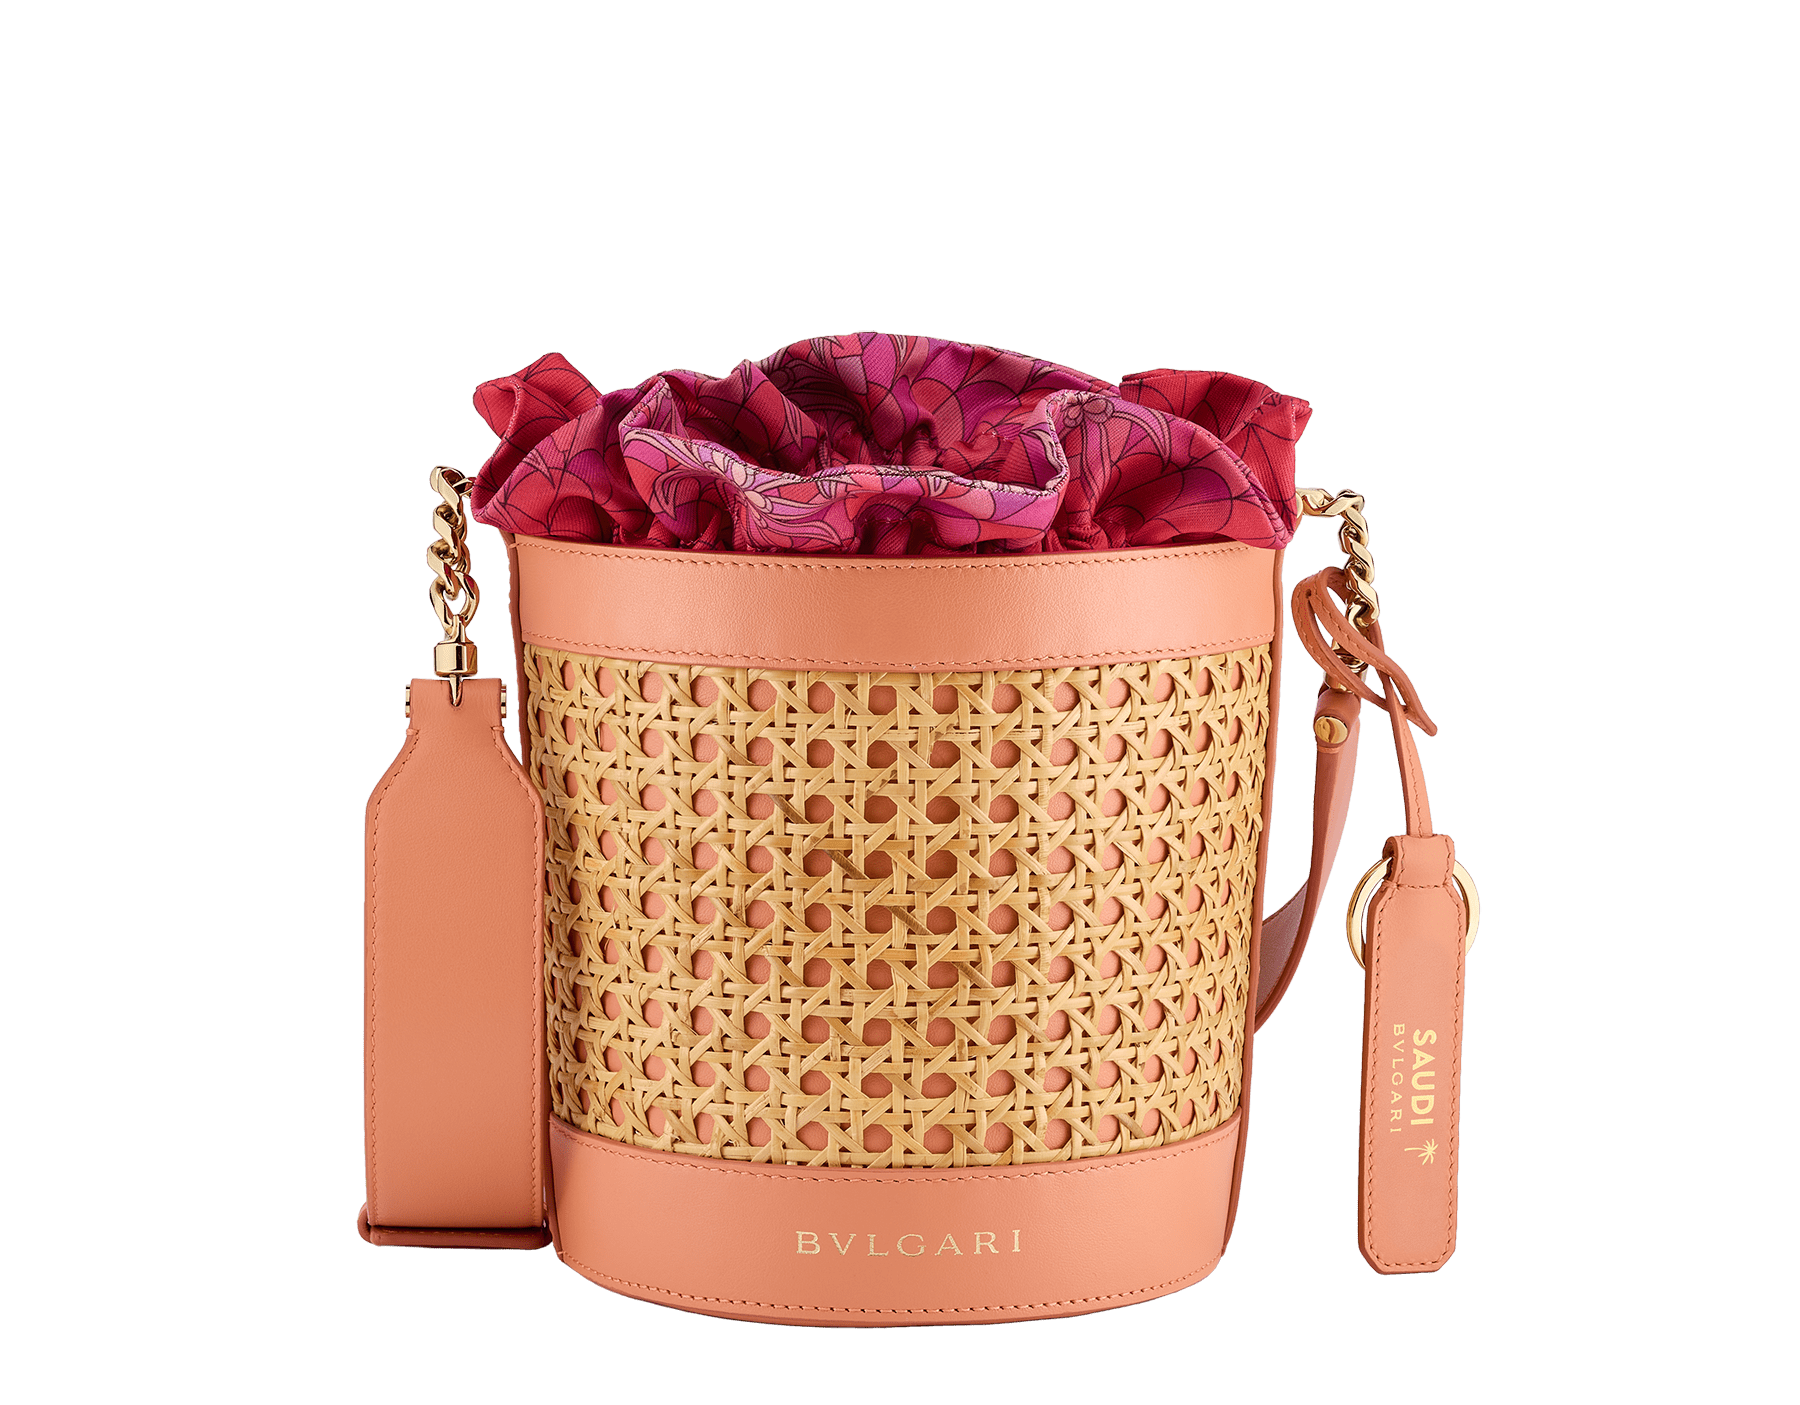 Serpenti Forever medium bucket bag in natural Vienna straw with coral carnelian orange calf leather details and customisable tag hot stamped with the "Saudi" inscription on one side. Detachable satin satchel with multicoloured print outside, beetroot spinel fuchsia inside, and drawstring closure with captivating snakeheads in light gold-plated brass. Special Resort Edition exclusive to Saudi Arabia. 292456 image 1